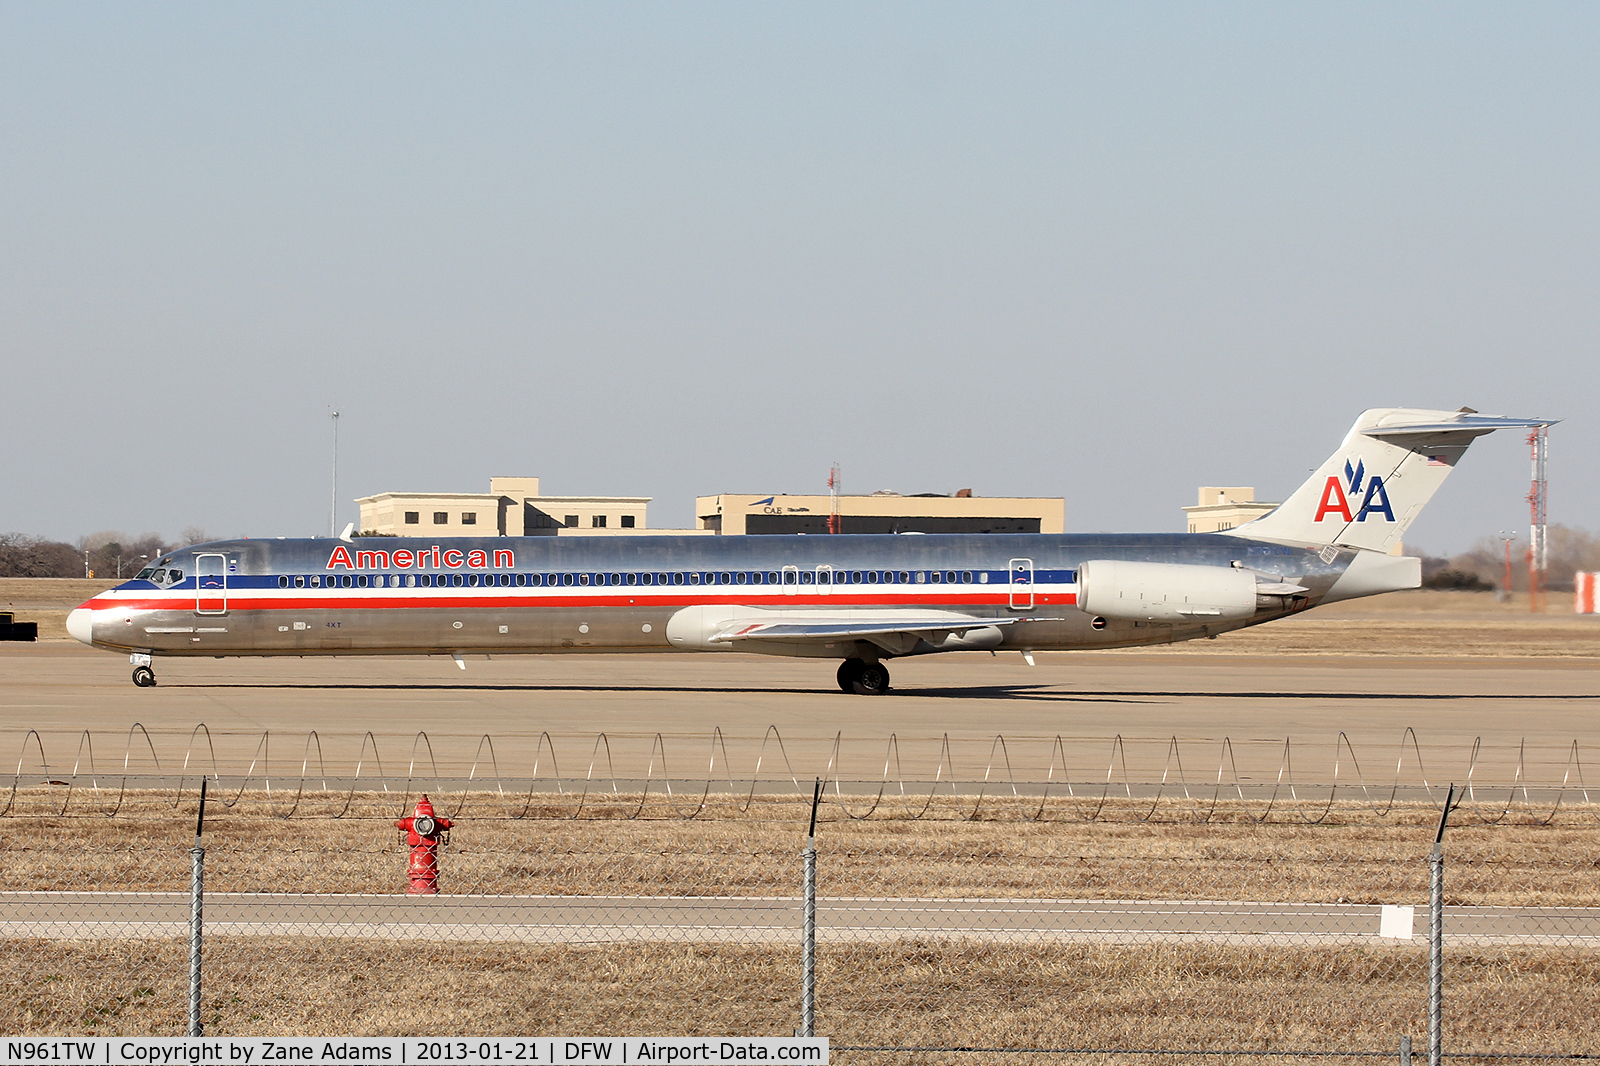 N961TW, 1999 McDonnell Douglas MD-83 (DC-9-83) C/N 53611, American Airlines at DFW Airport